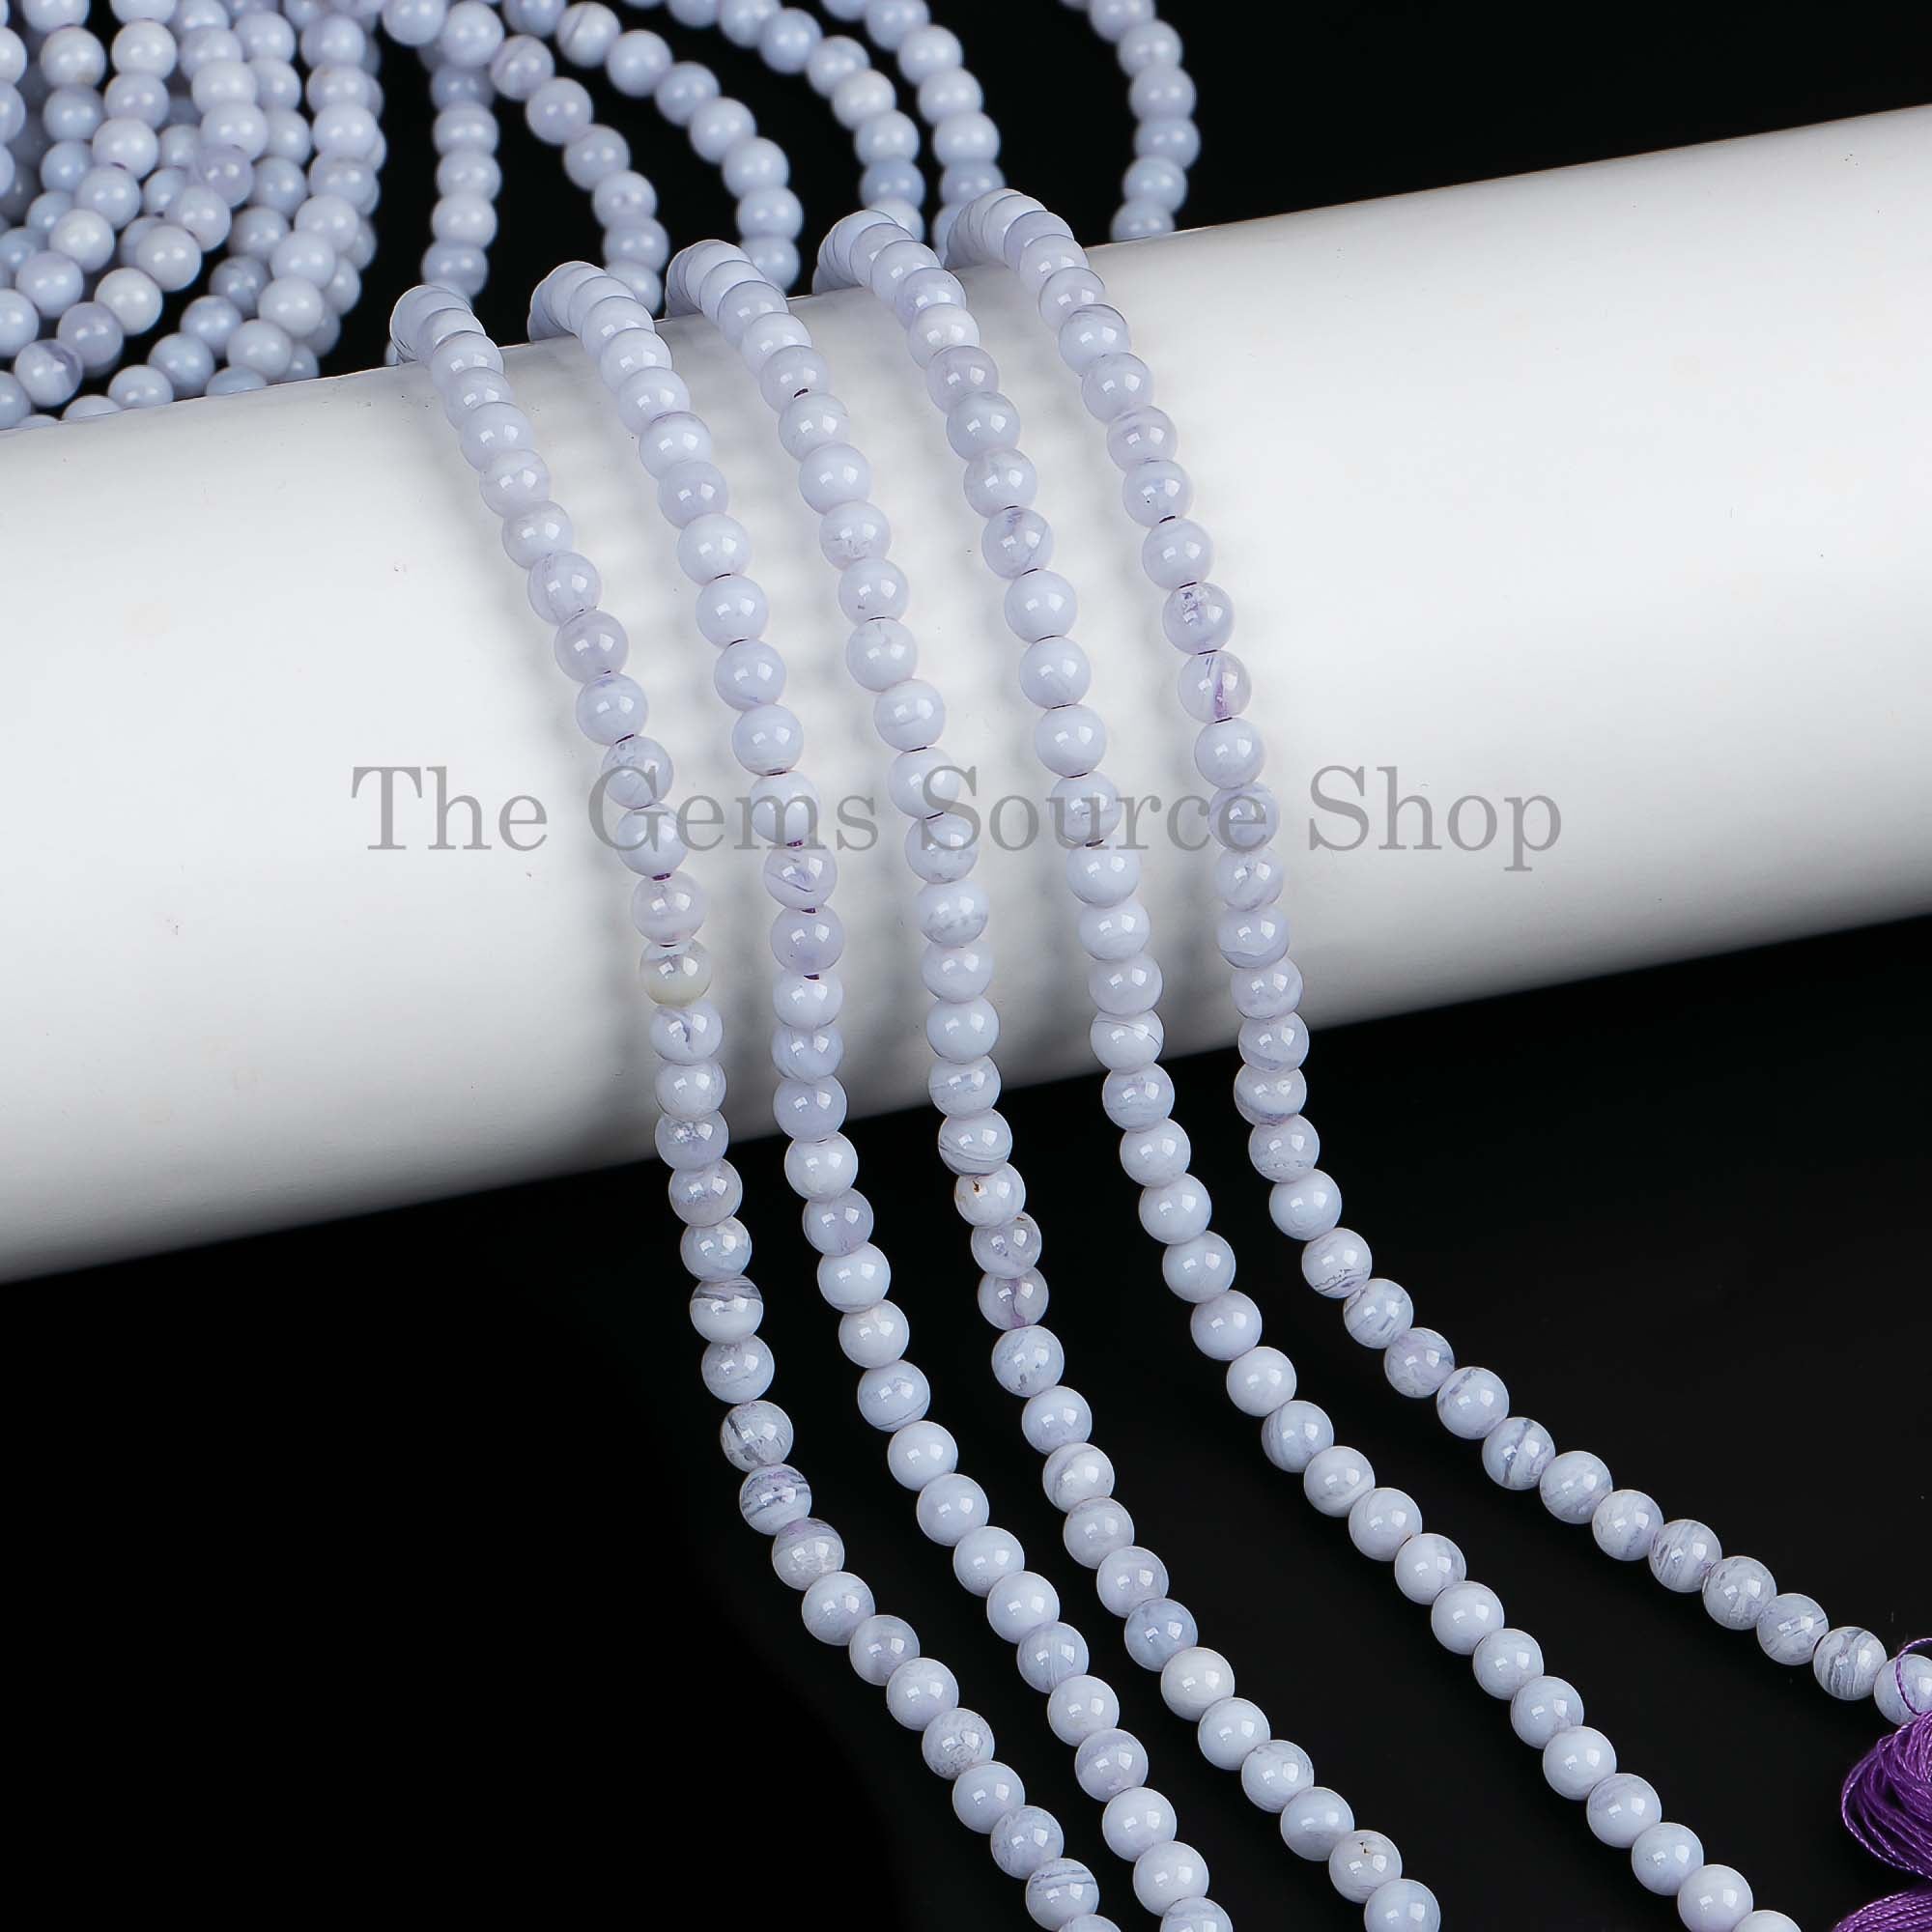 4.5-5 mm Blue Lace Agate Plain Round Beads, Round Shape Beads, Blue Lace Agate Beads